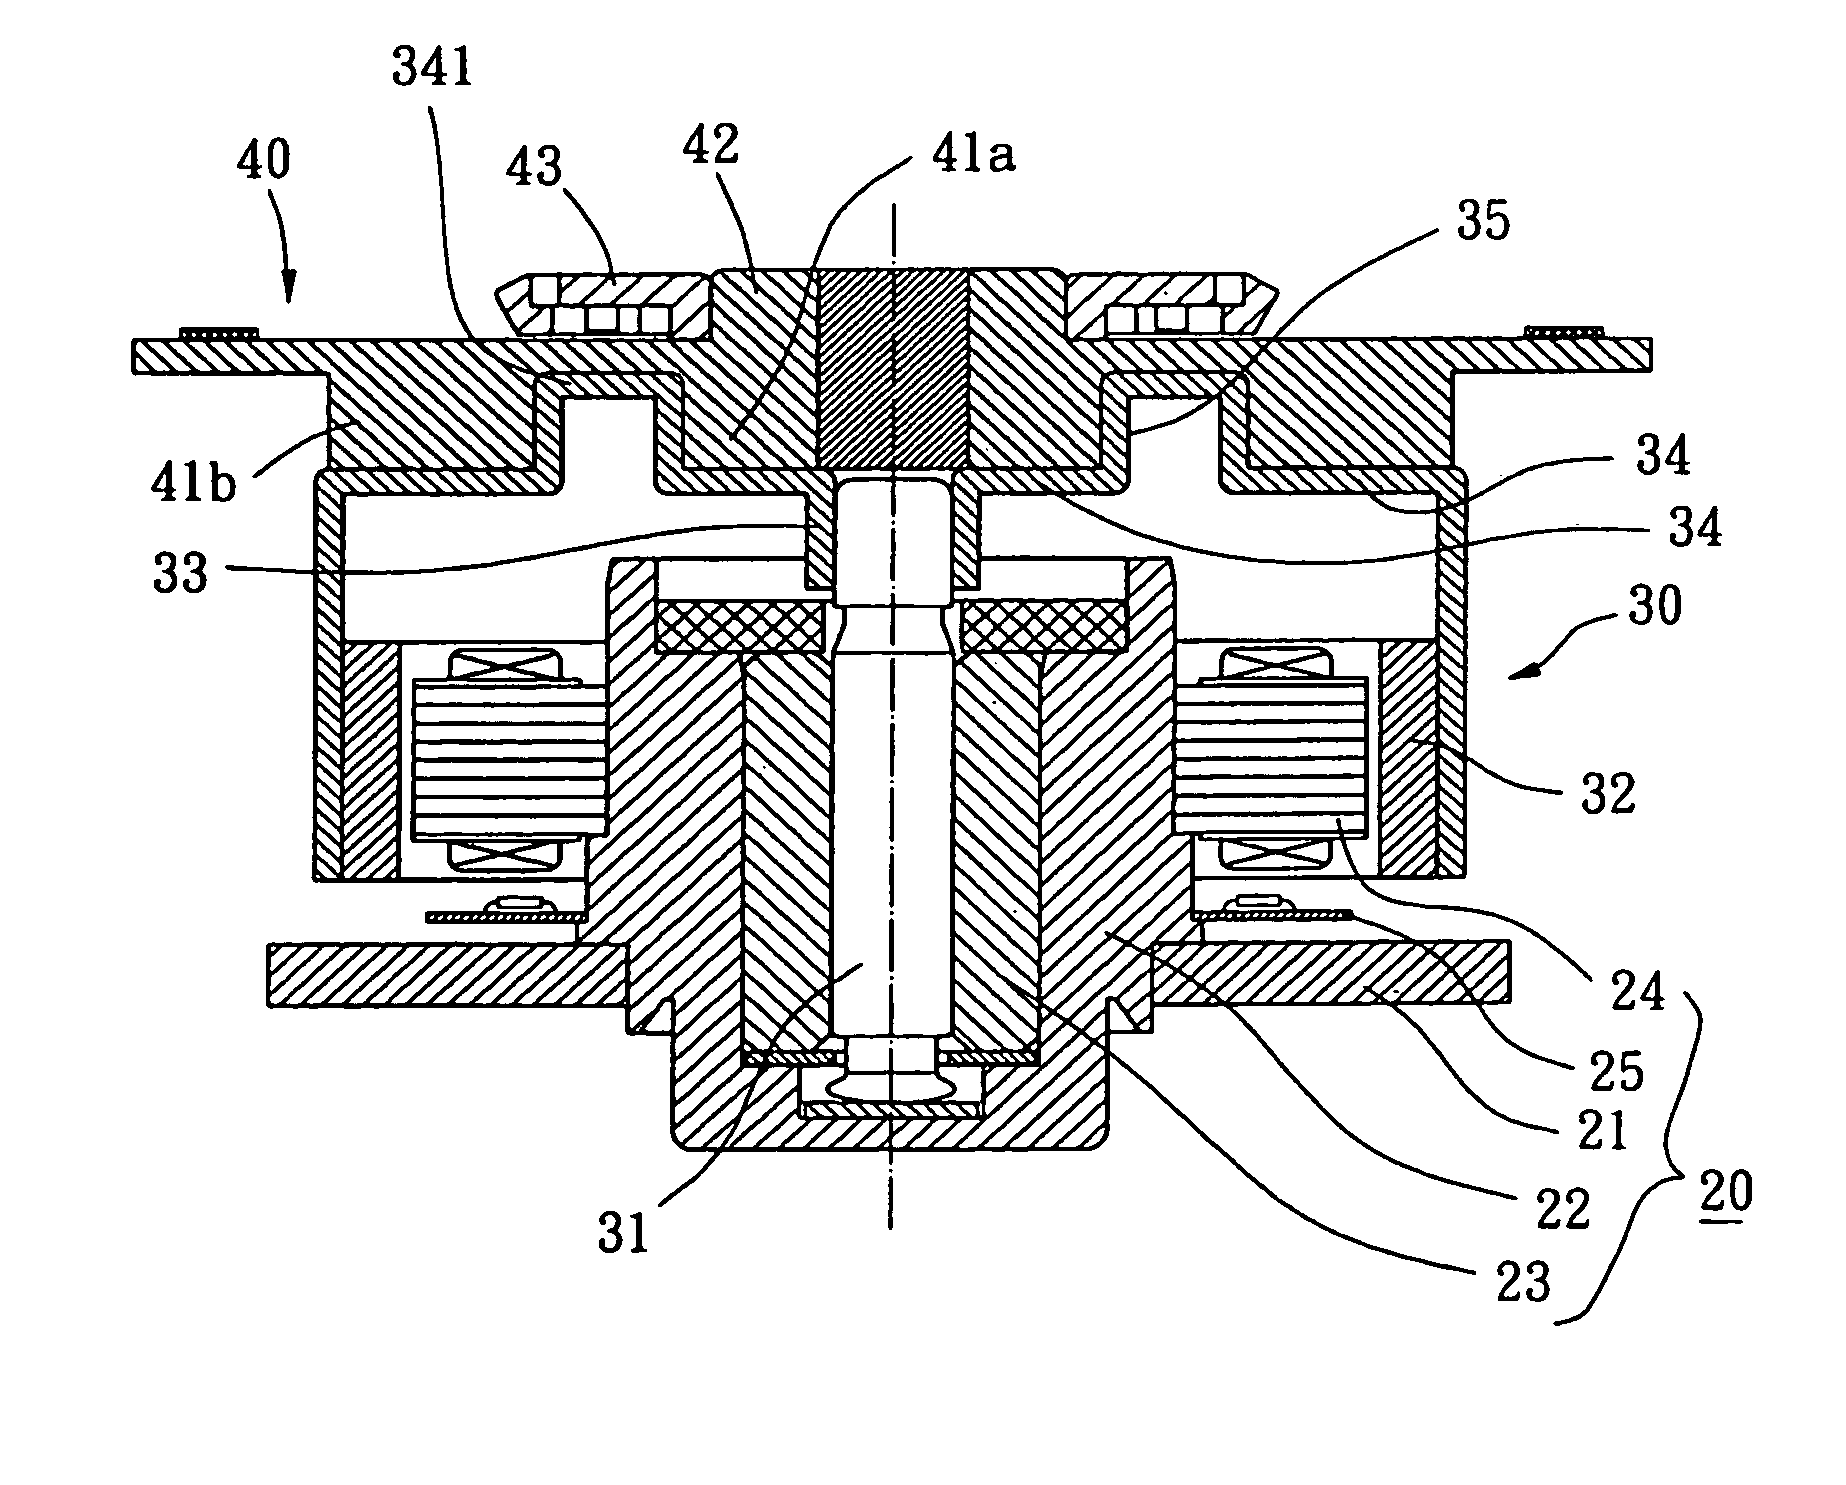 Brushless DC motor with tray coupling structure